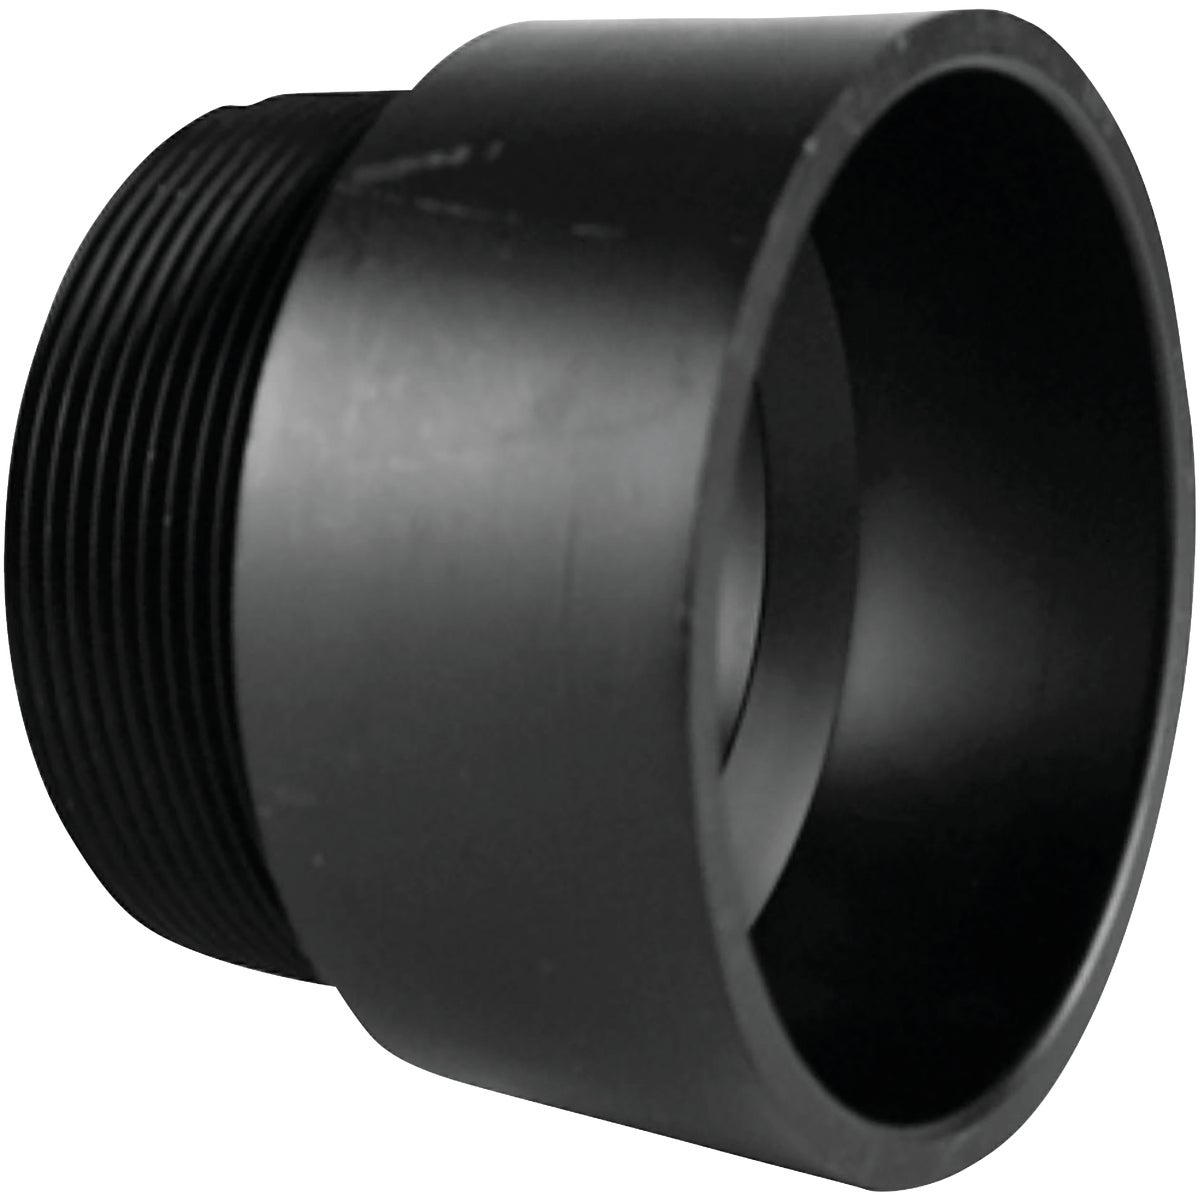 1-1/2″ ABS MALE ADAPTER